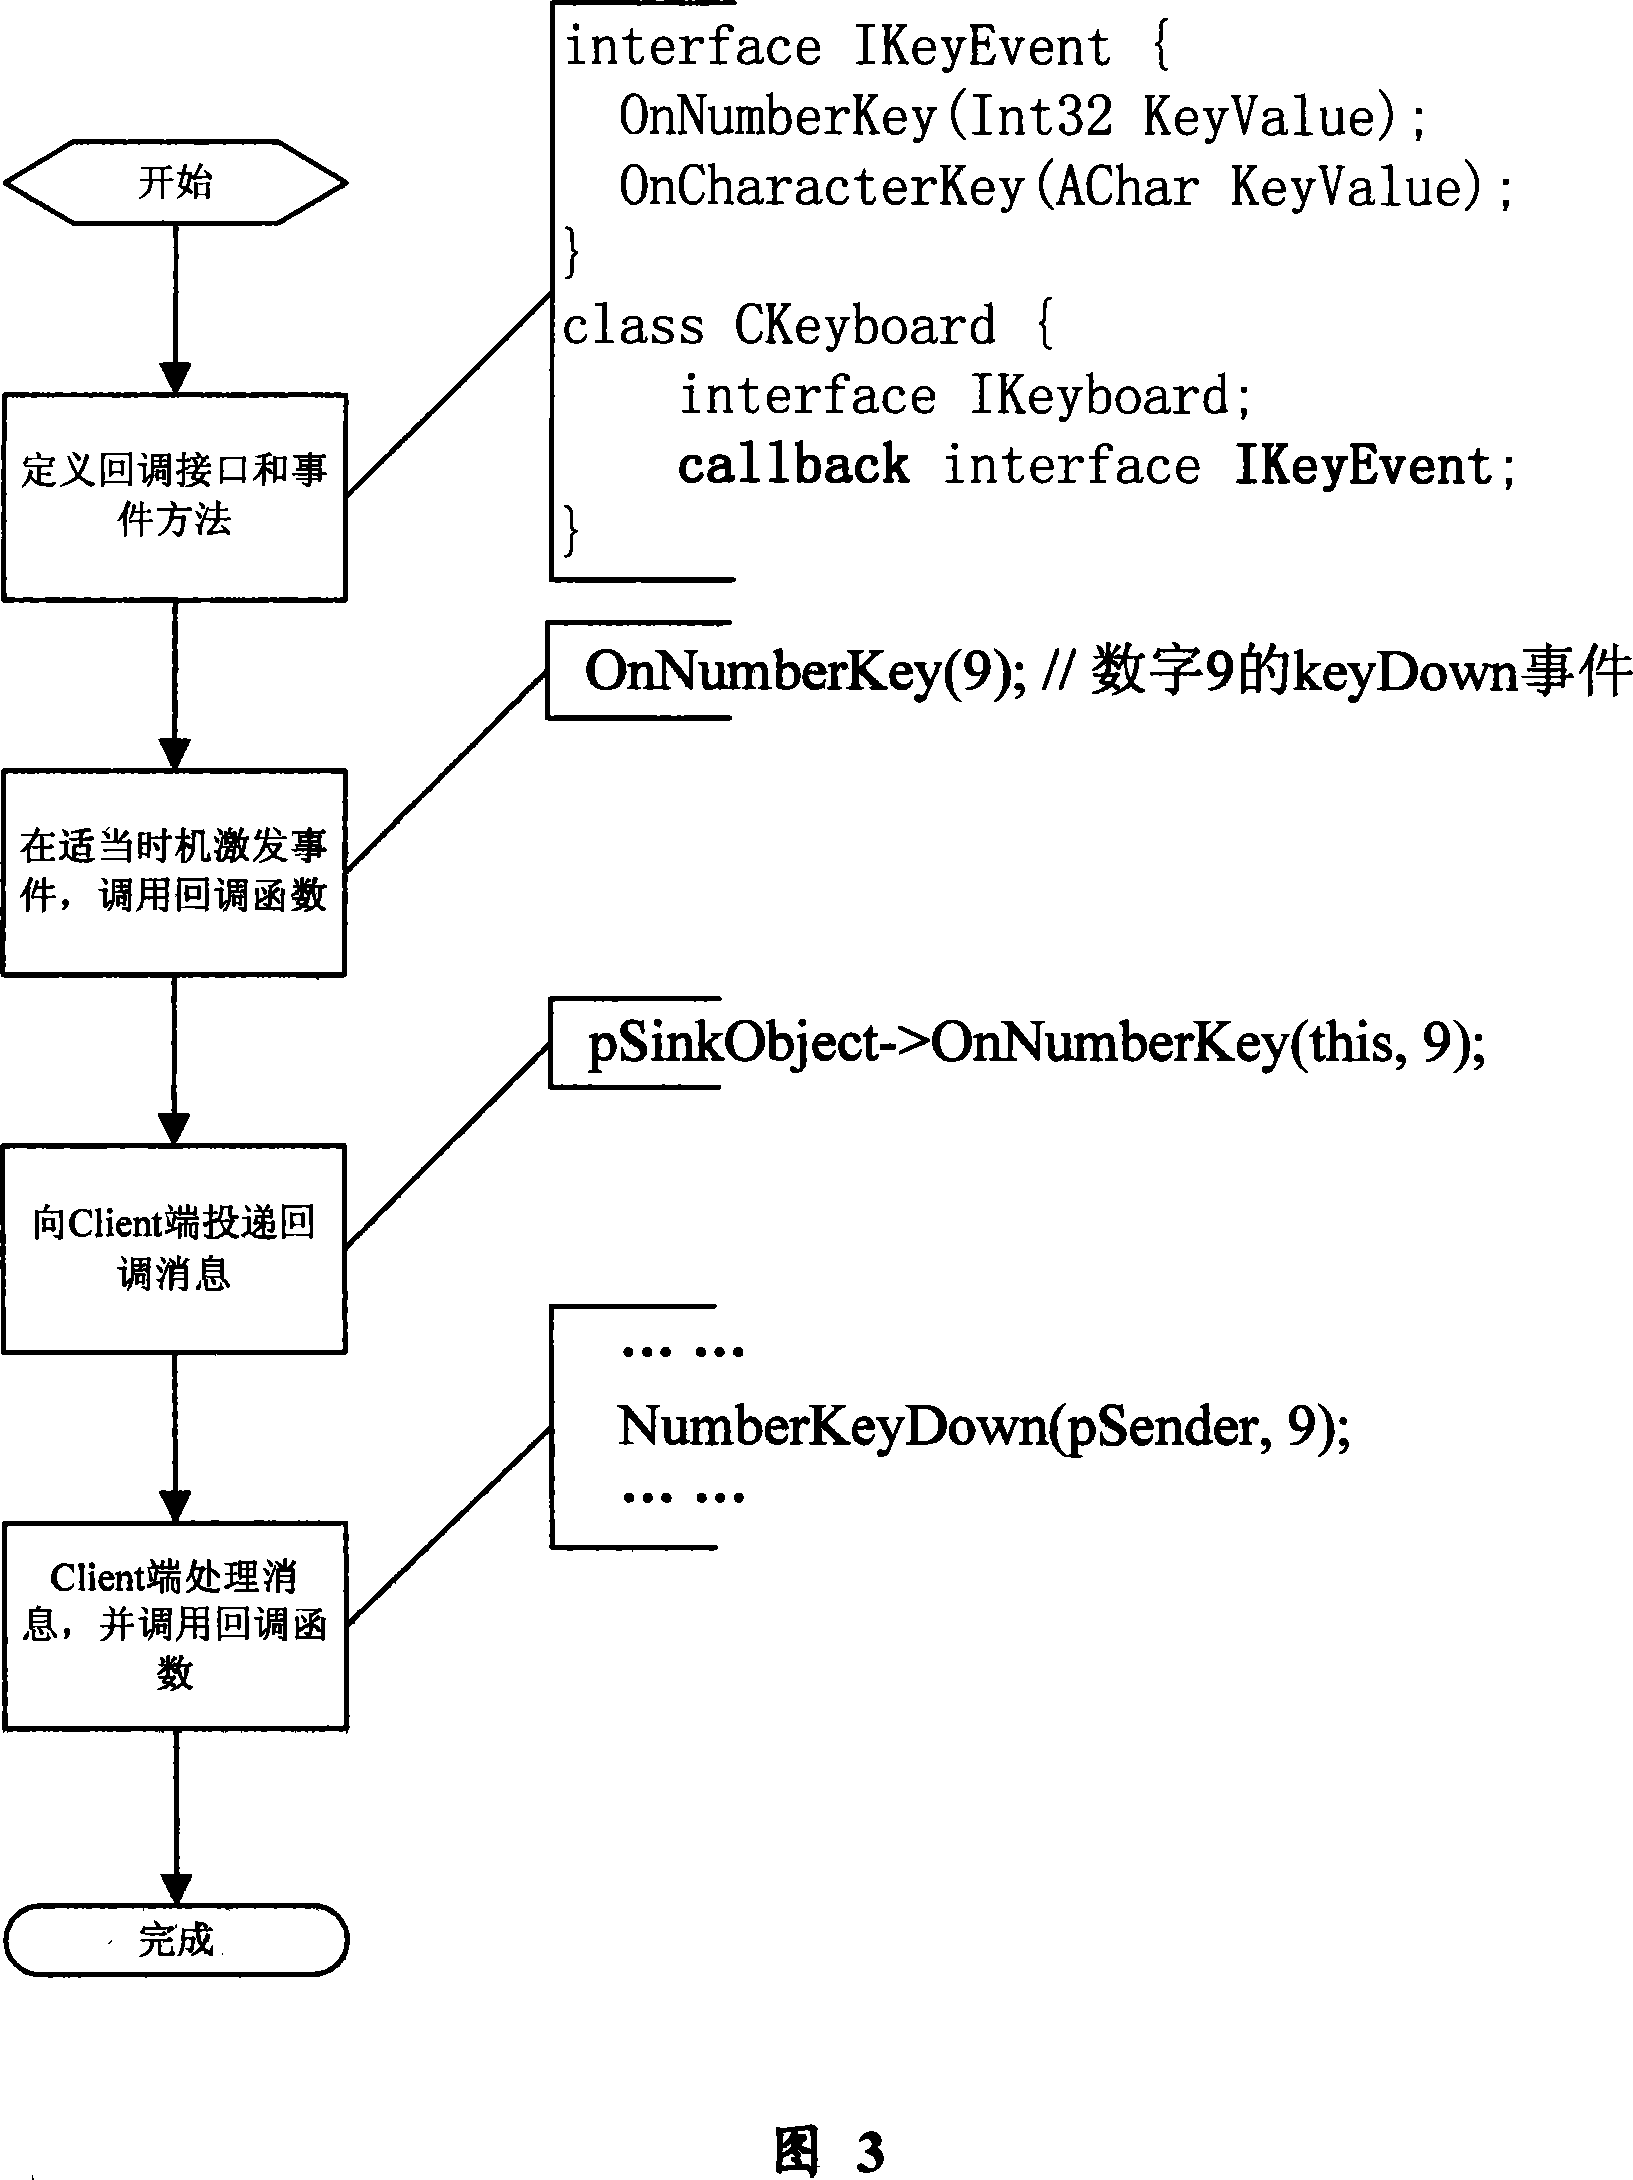 Method for implementing event call-back based on component interface in computer software system